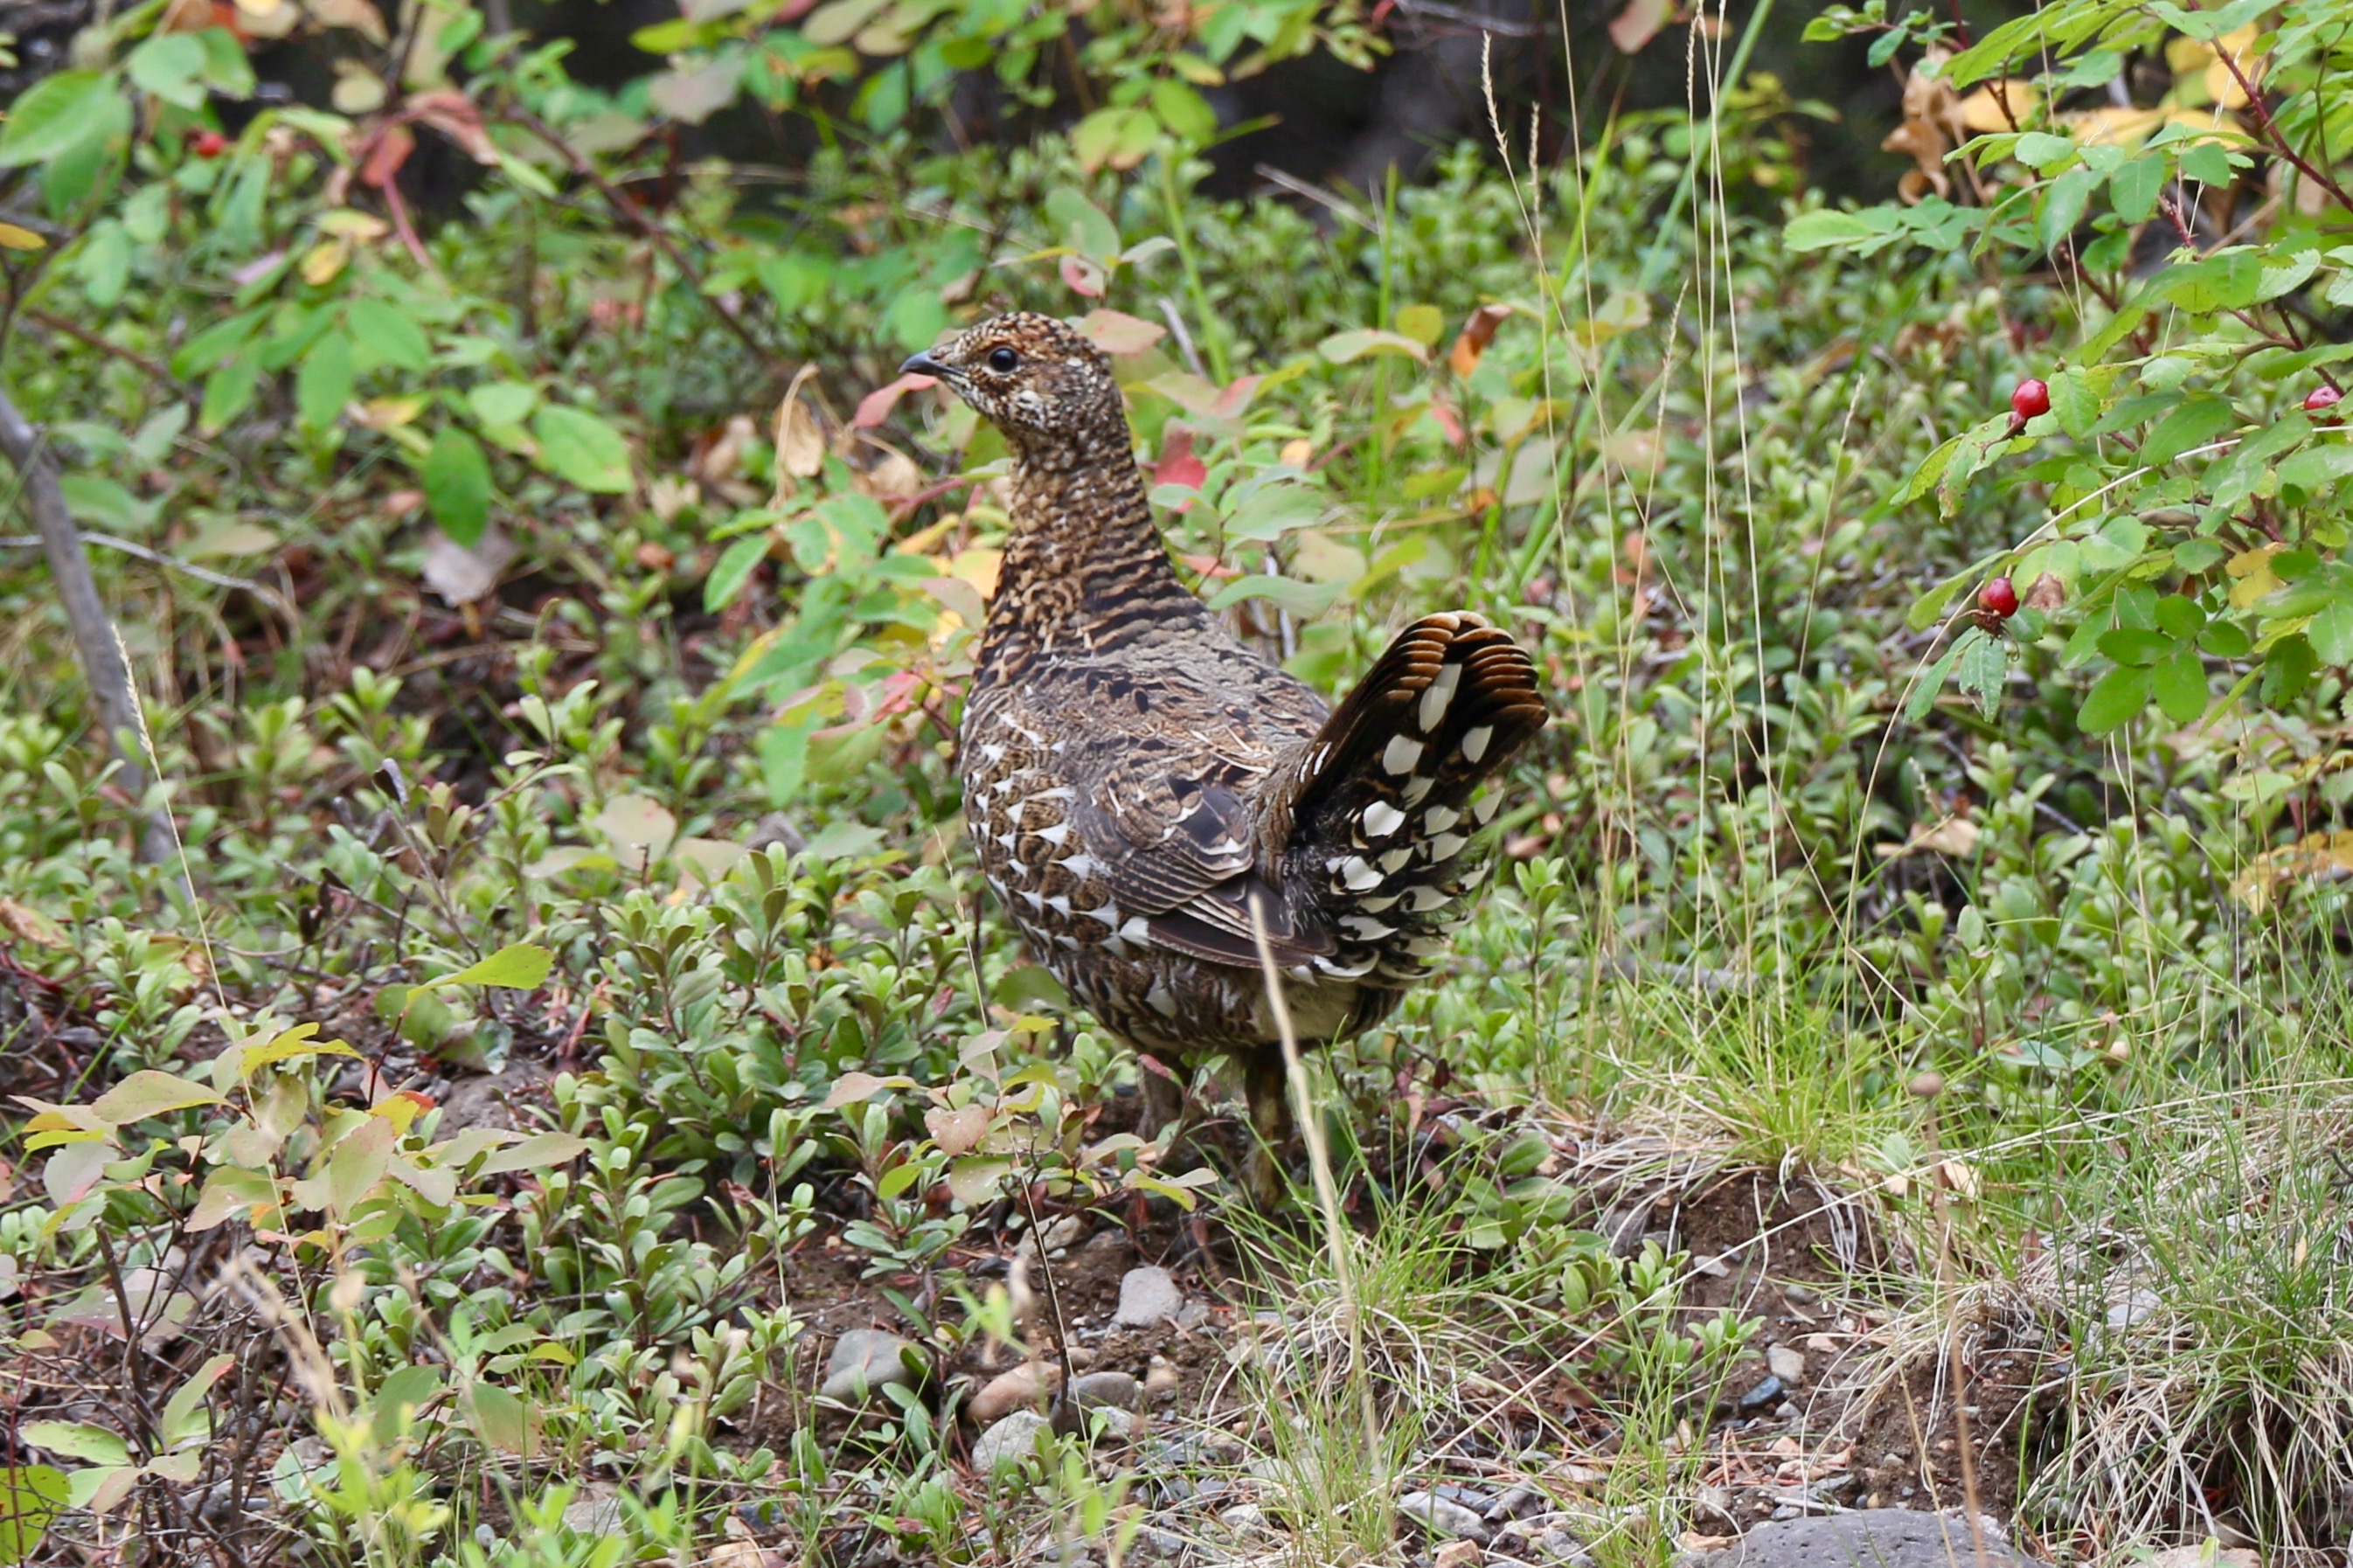 Spruce grouse looking back at me from the ground. There's grass and plants all around. Grouse look kind of like chickens with very intricate feather patterns. This one looks mostly black but with white and brown spots and markings all over its feathers. It has a black tail with white underparts and yellowish tips.
